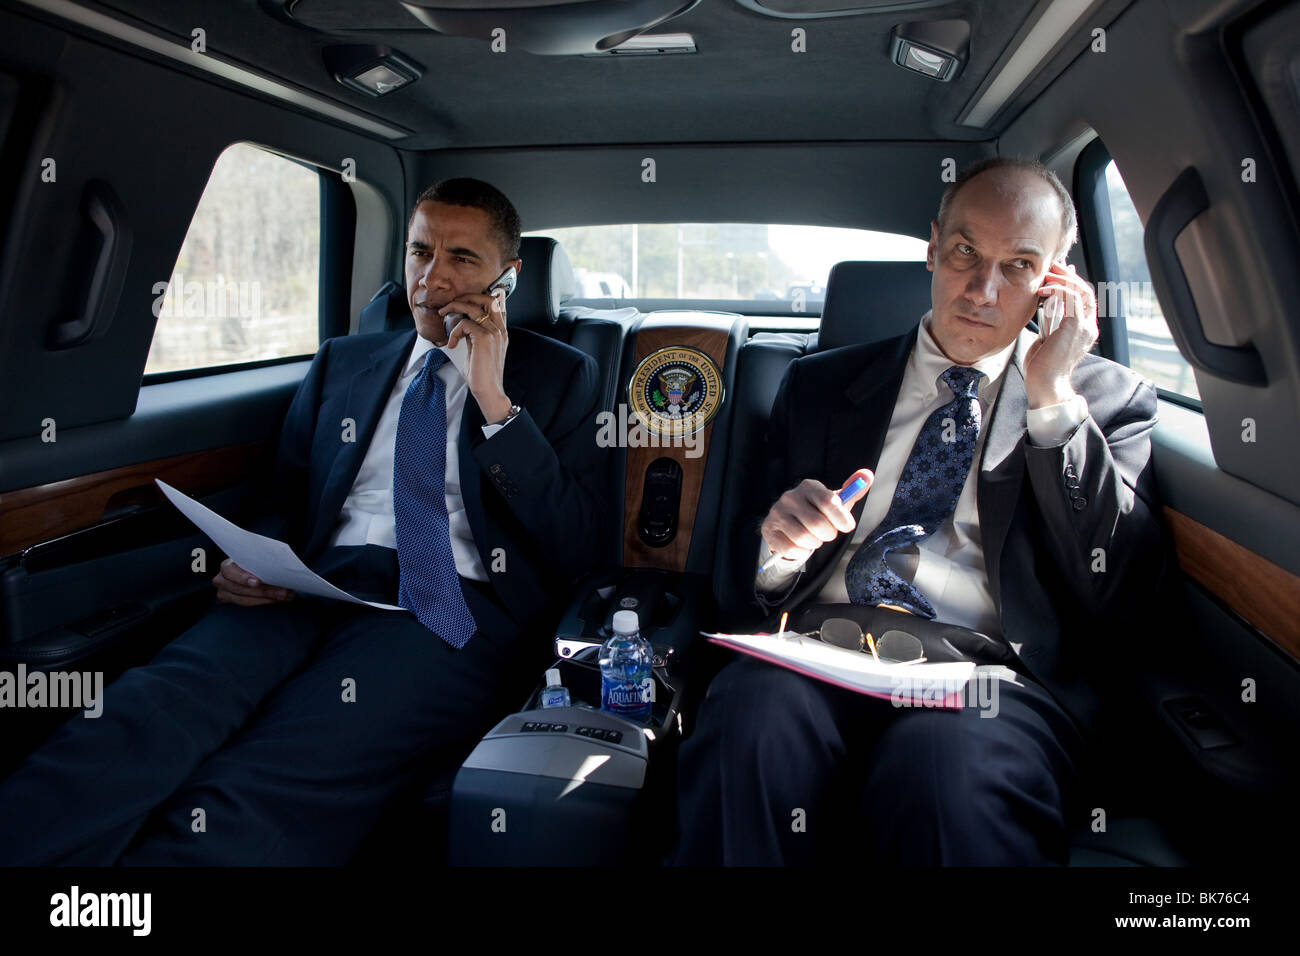 President Barack Obama talks on the phone in his limo Stock Photo